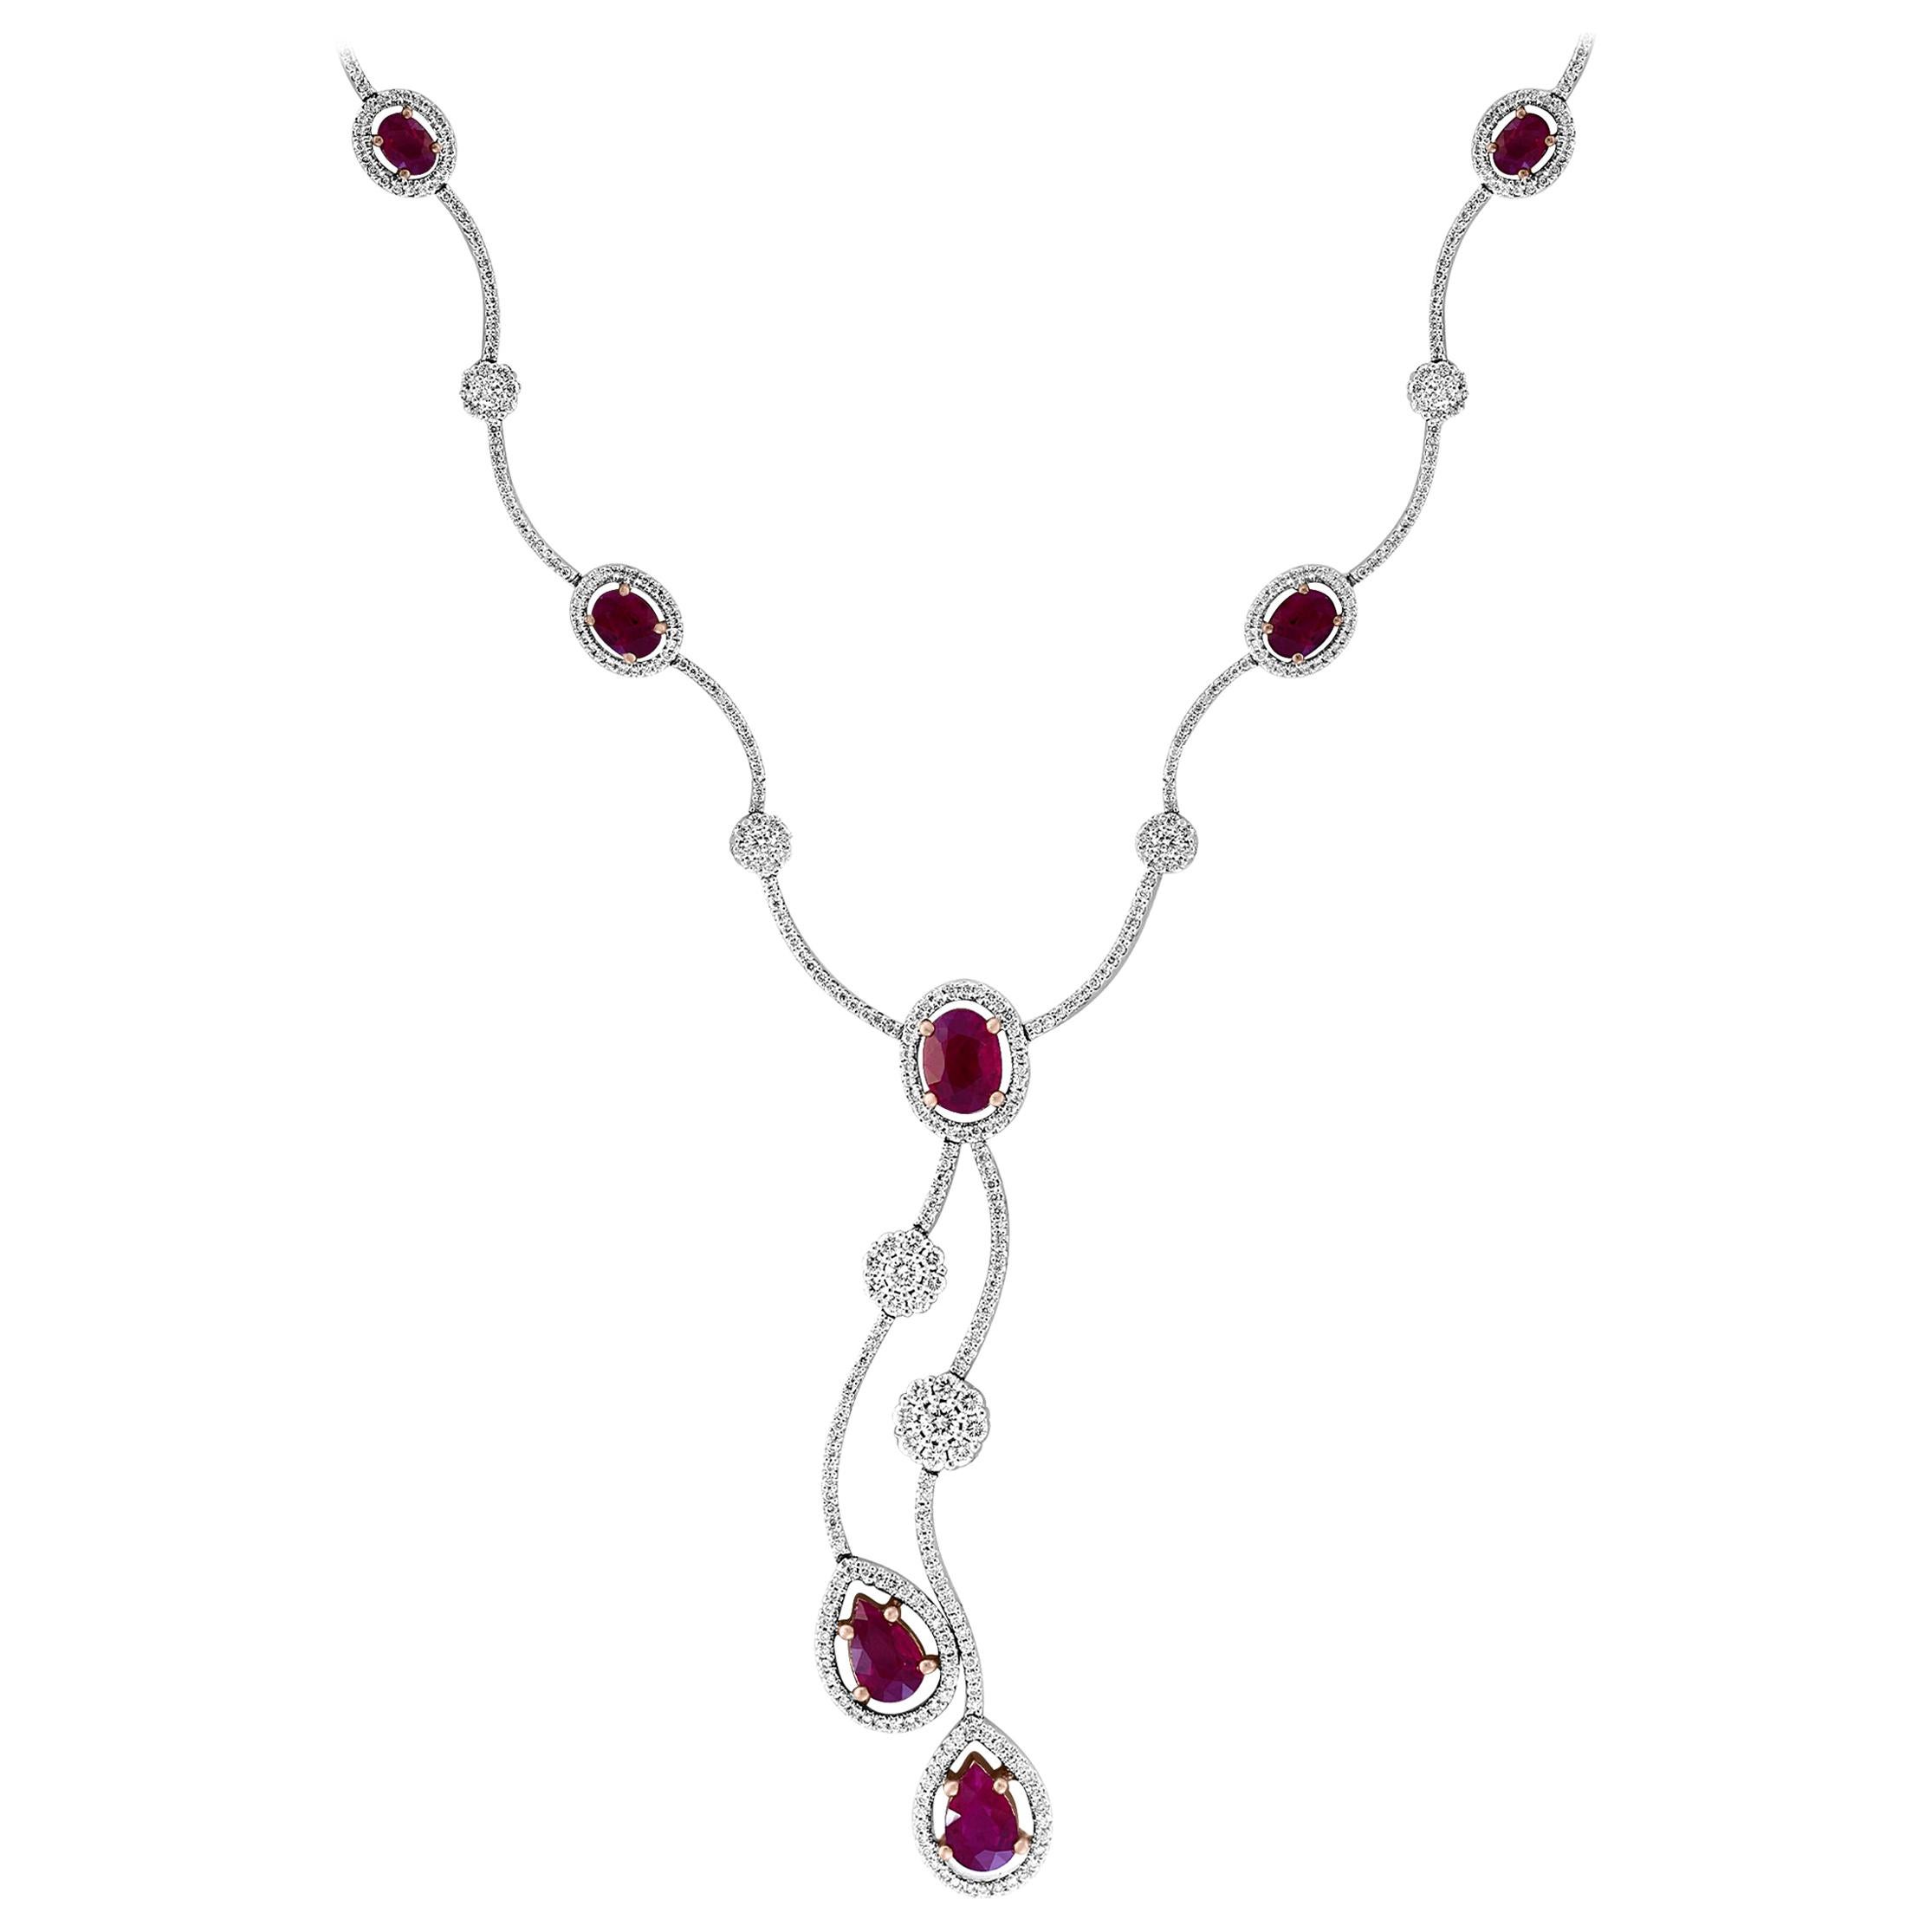 AGI Certified Natural Burma Ruby and Diamond Necklace 18 Karat White Gold